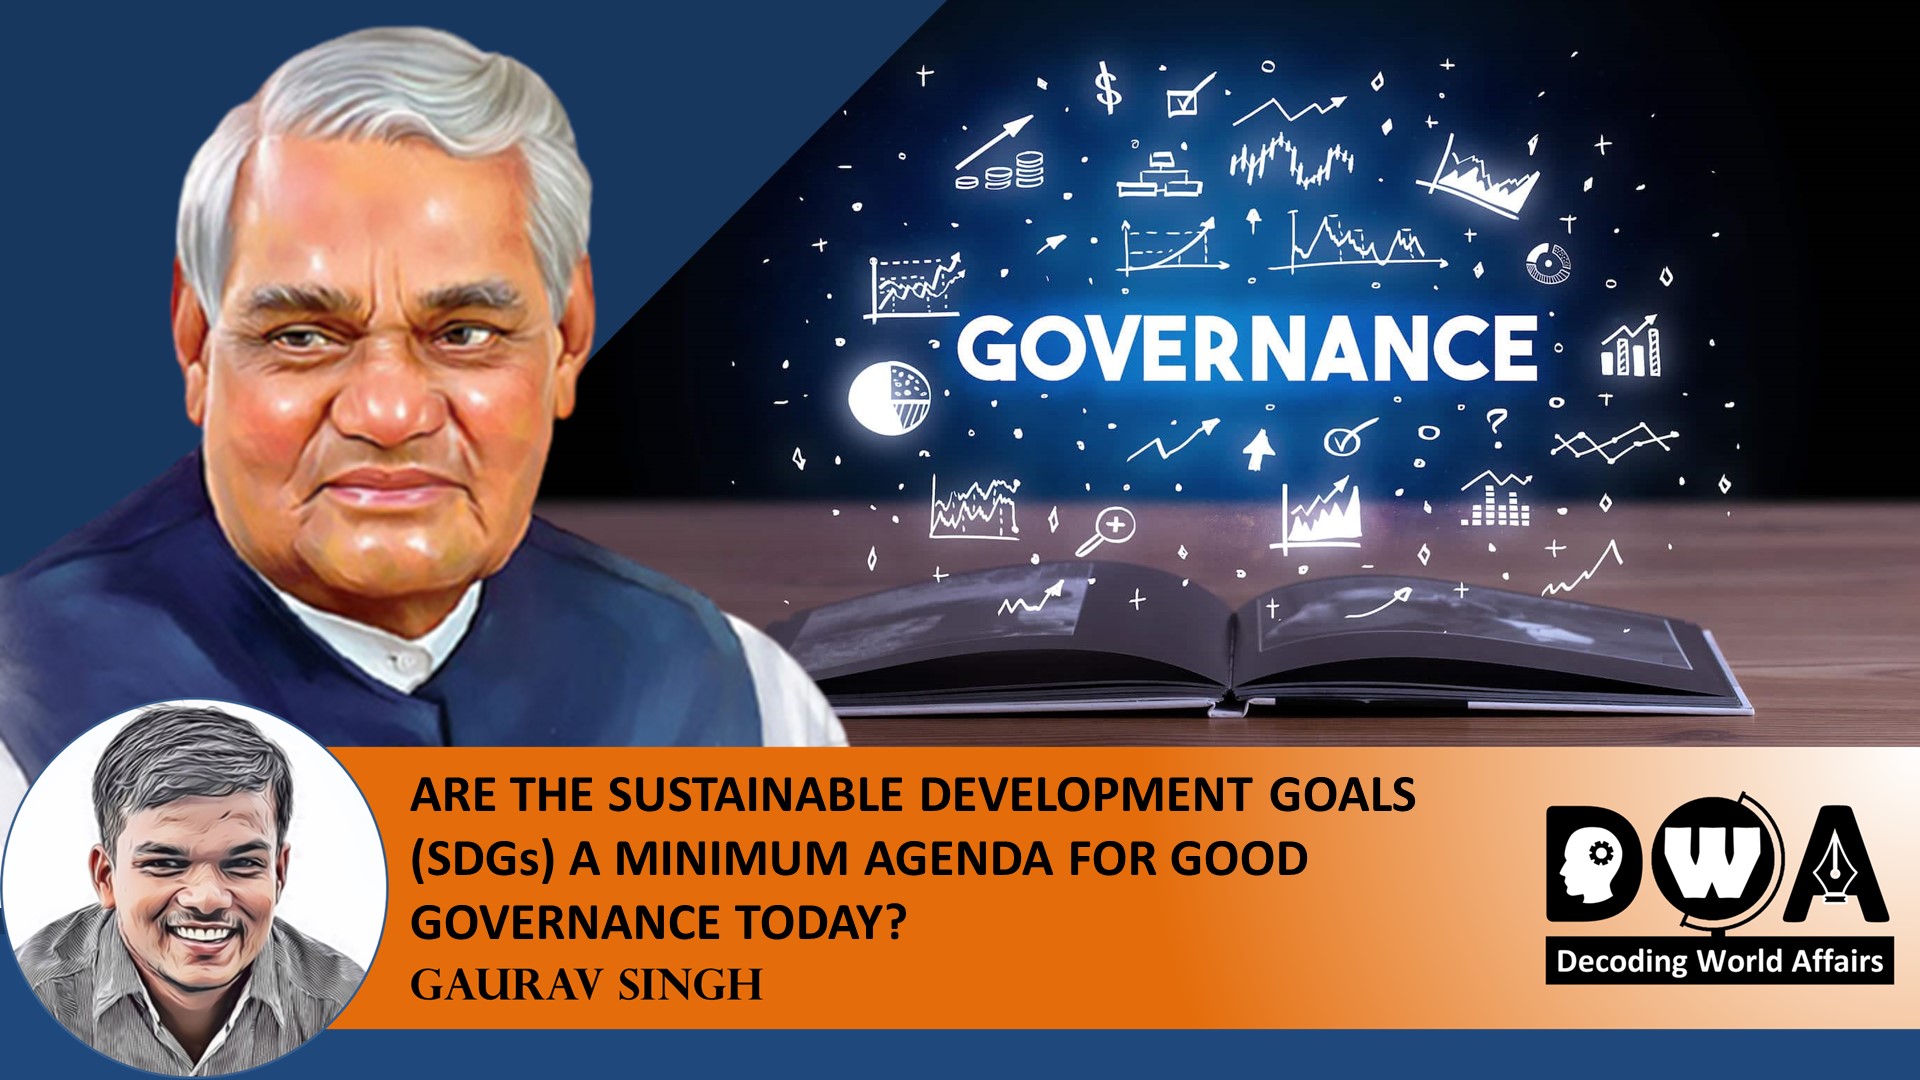 Good governance and sustainable development goals